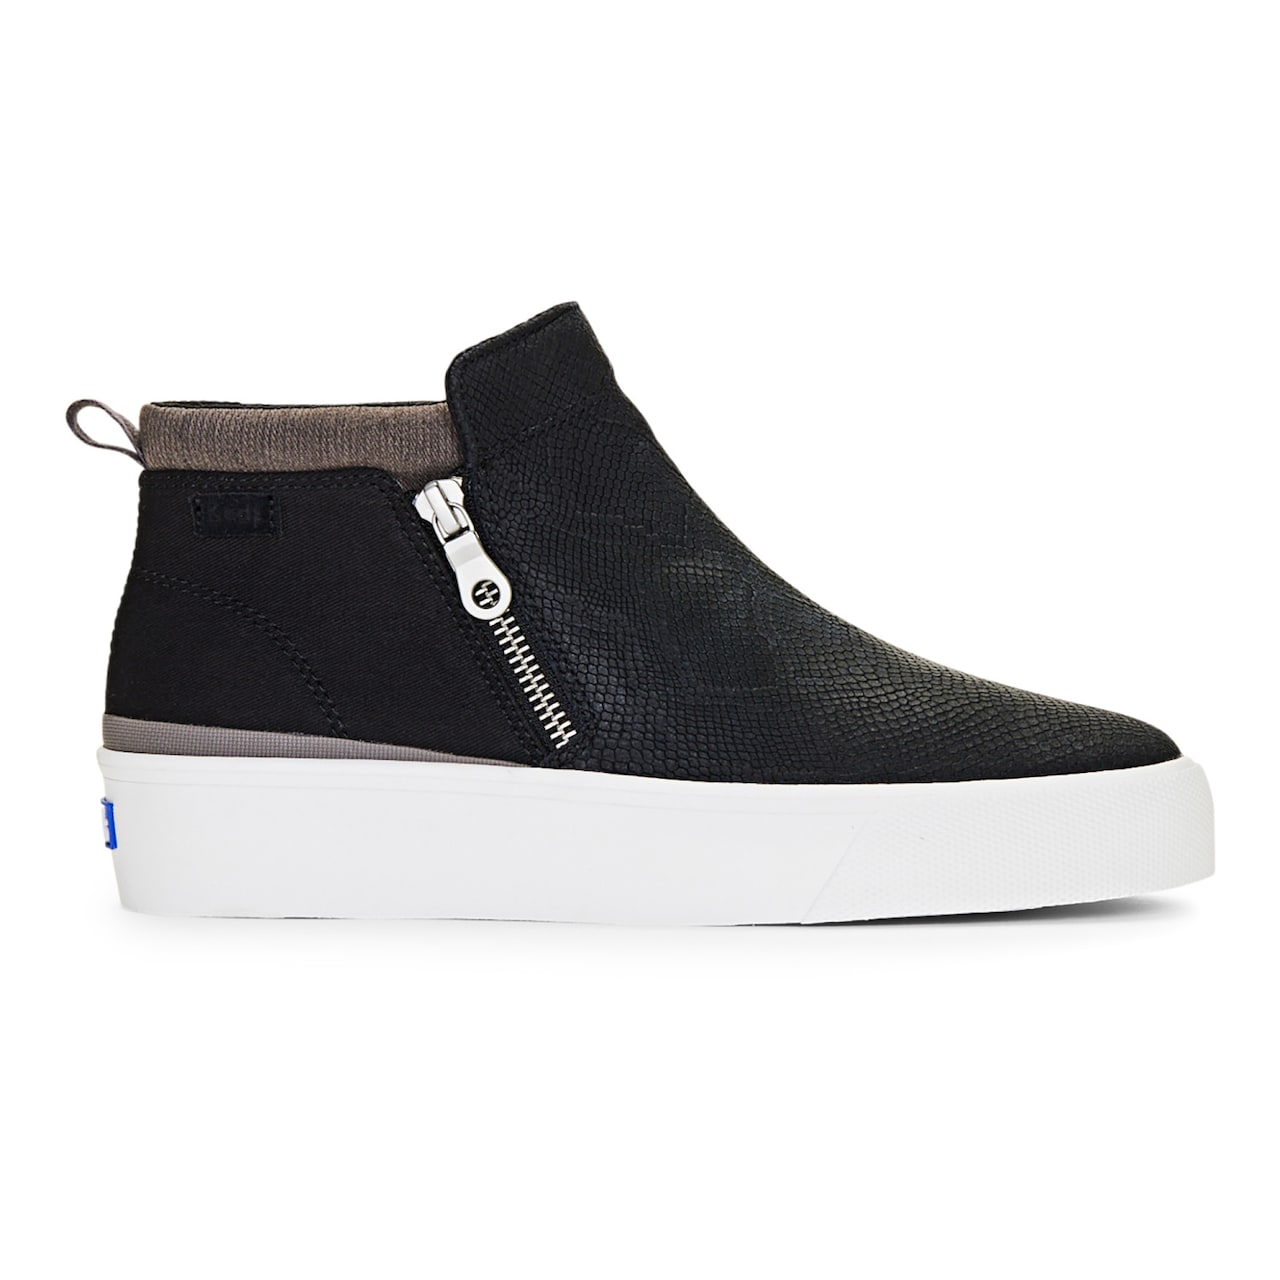 Keds Women's Shoes: Keds Cooper Zip Suede Bootie $24.48, Snake Embossed Suede Bootie $35 & More + Free Shipping $50+